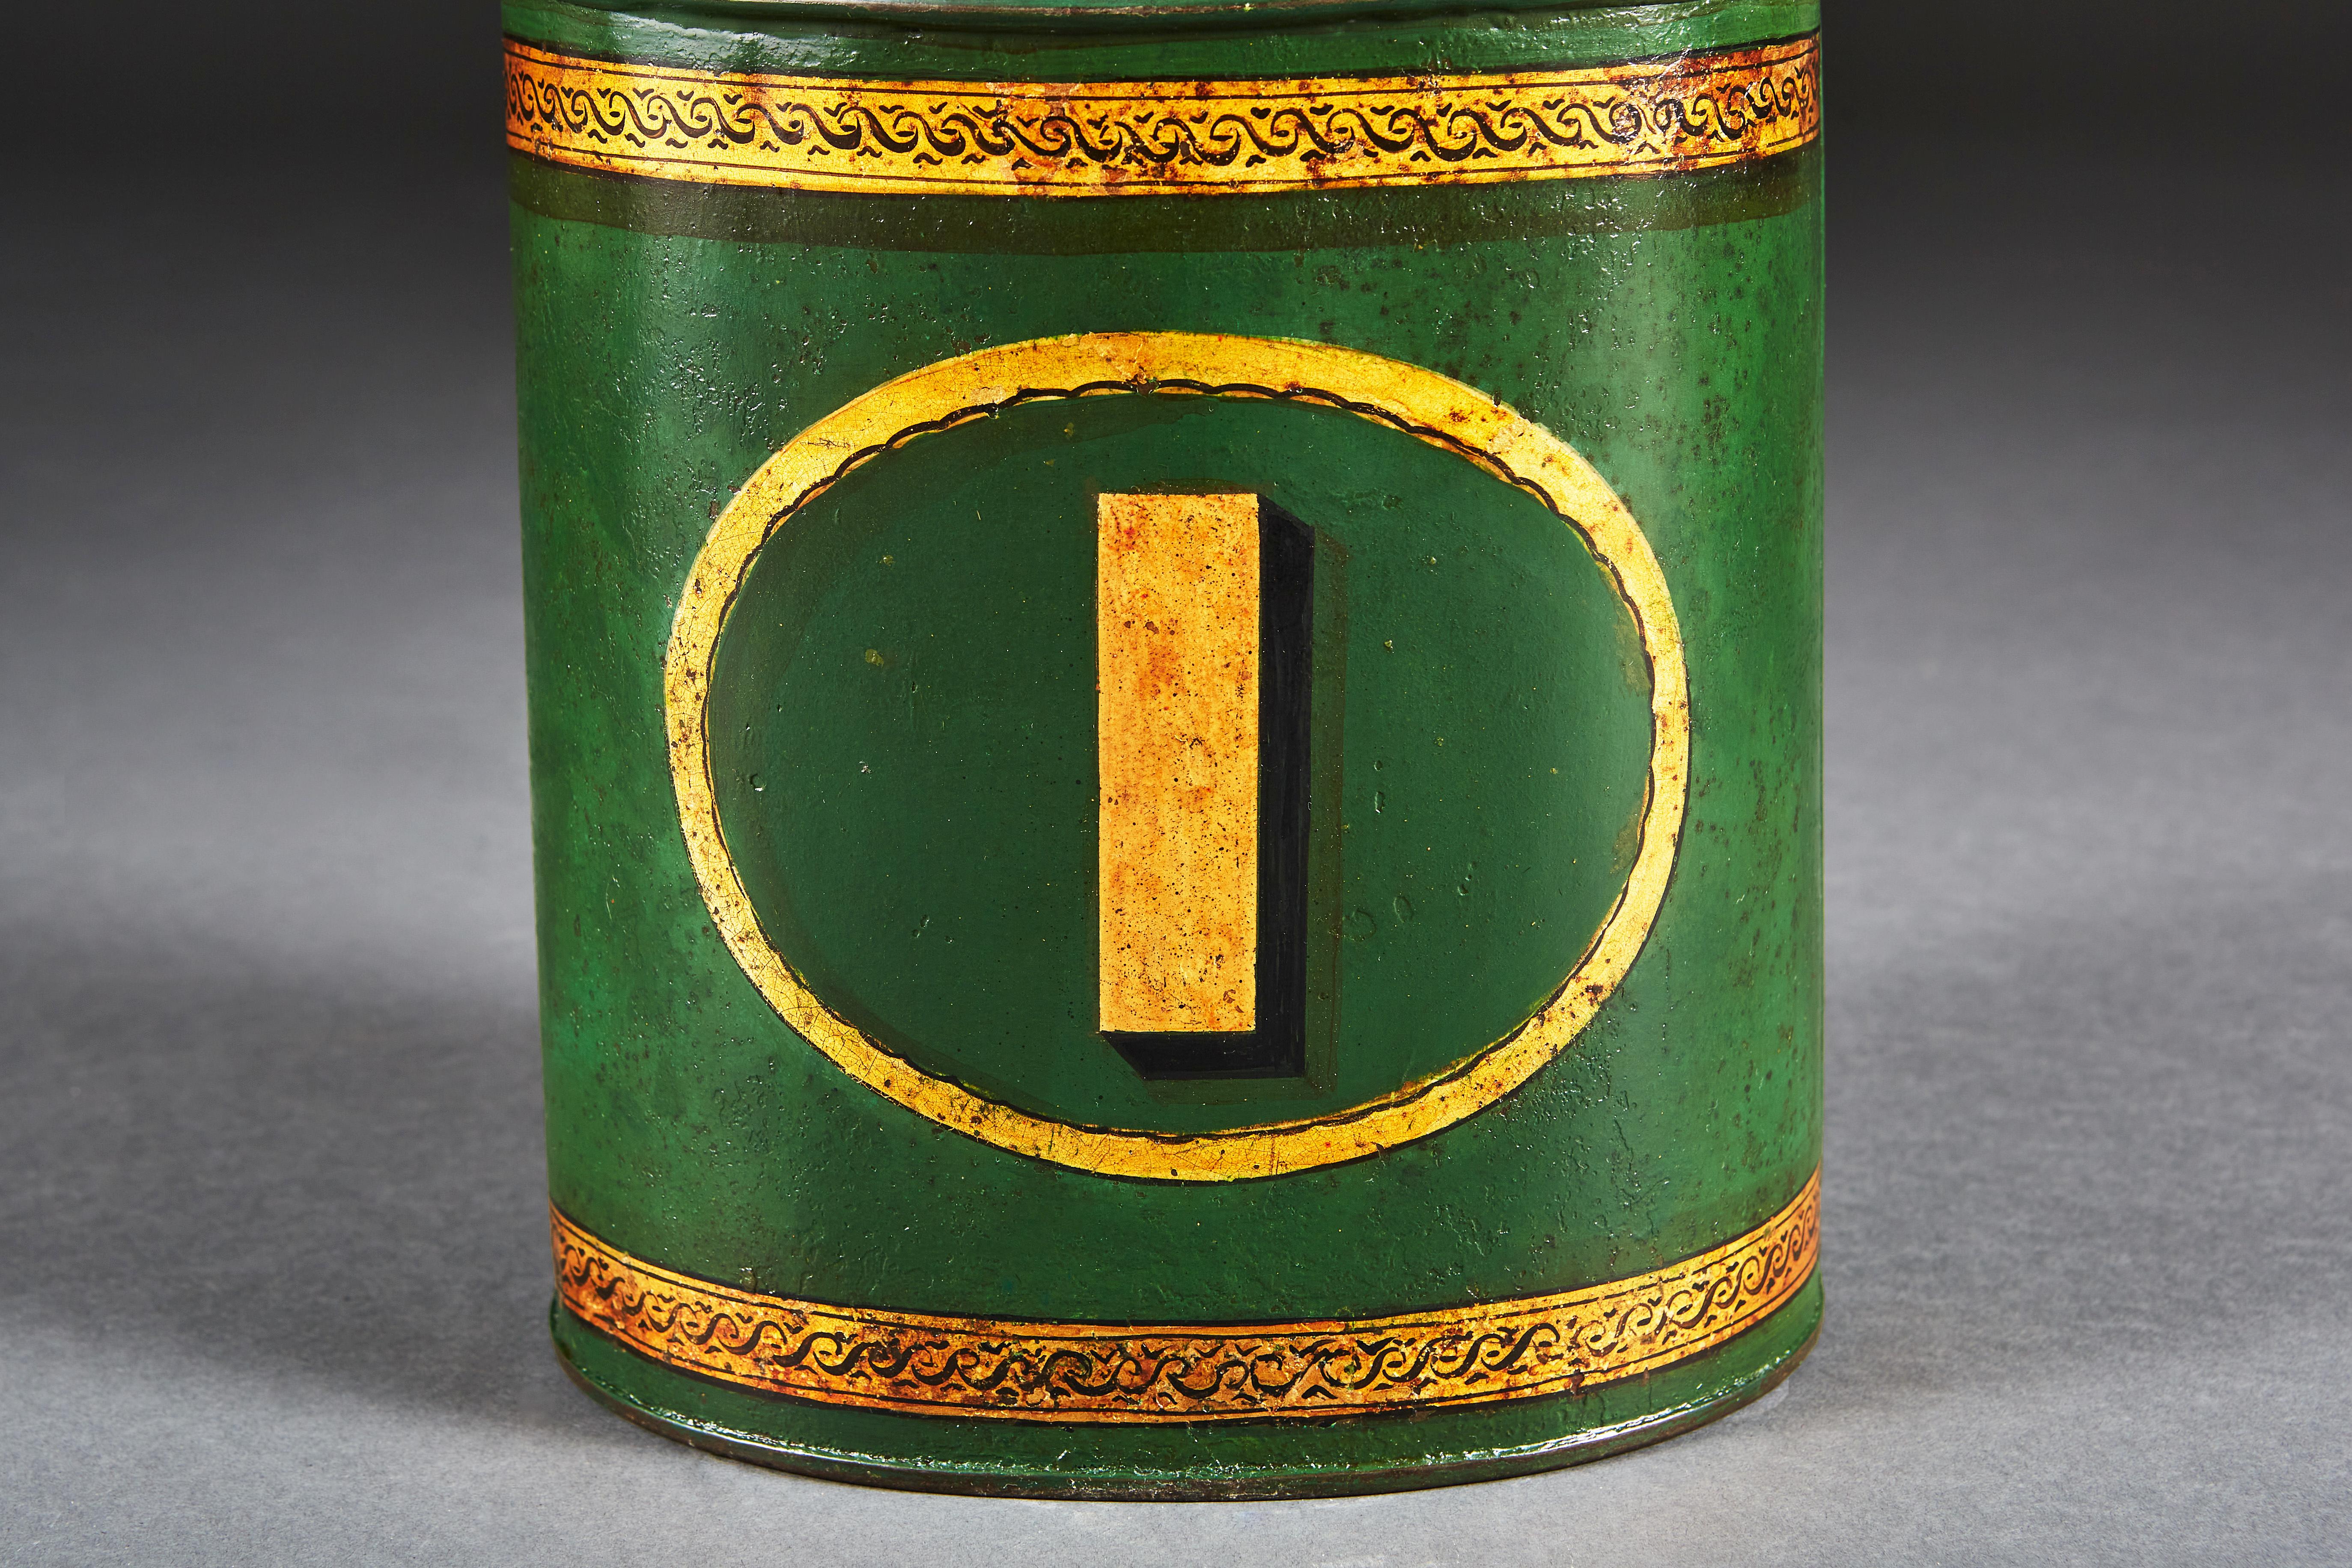 A pair of late 19th century green toleware tea tins, decorated with numbers 1 and 2 to the fronts, now converted as lamps.

Please note: lampshades not included.

Currently wired for the UK.